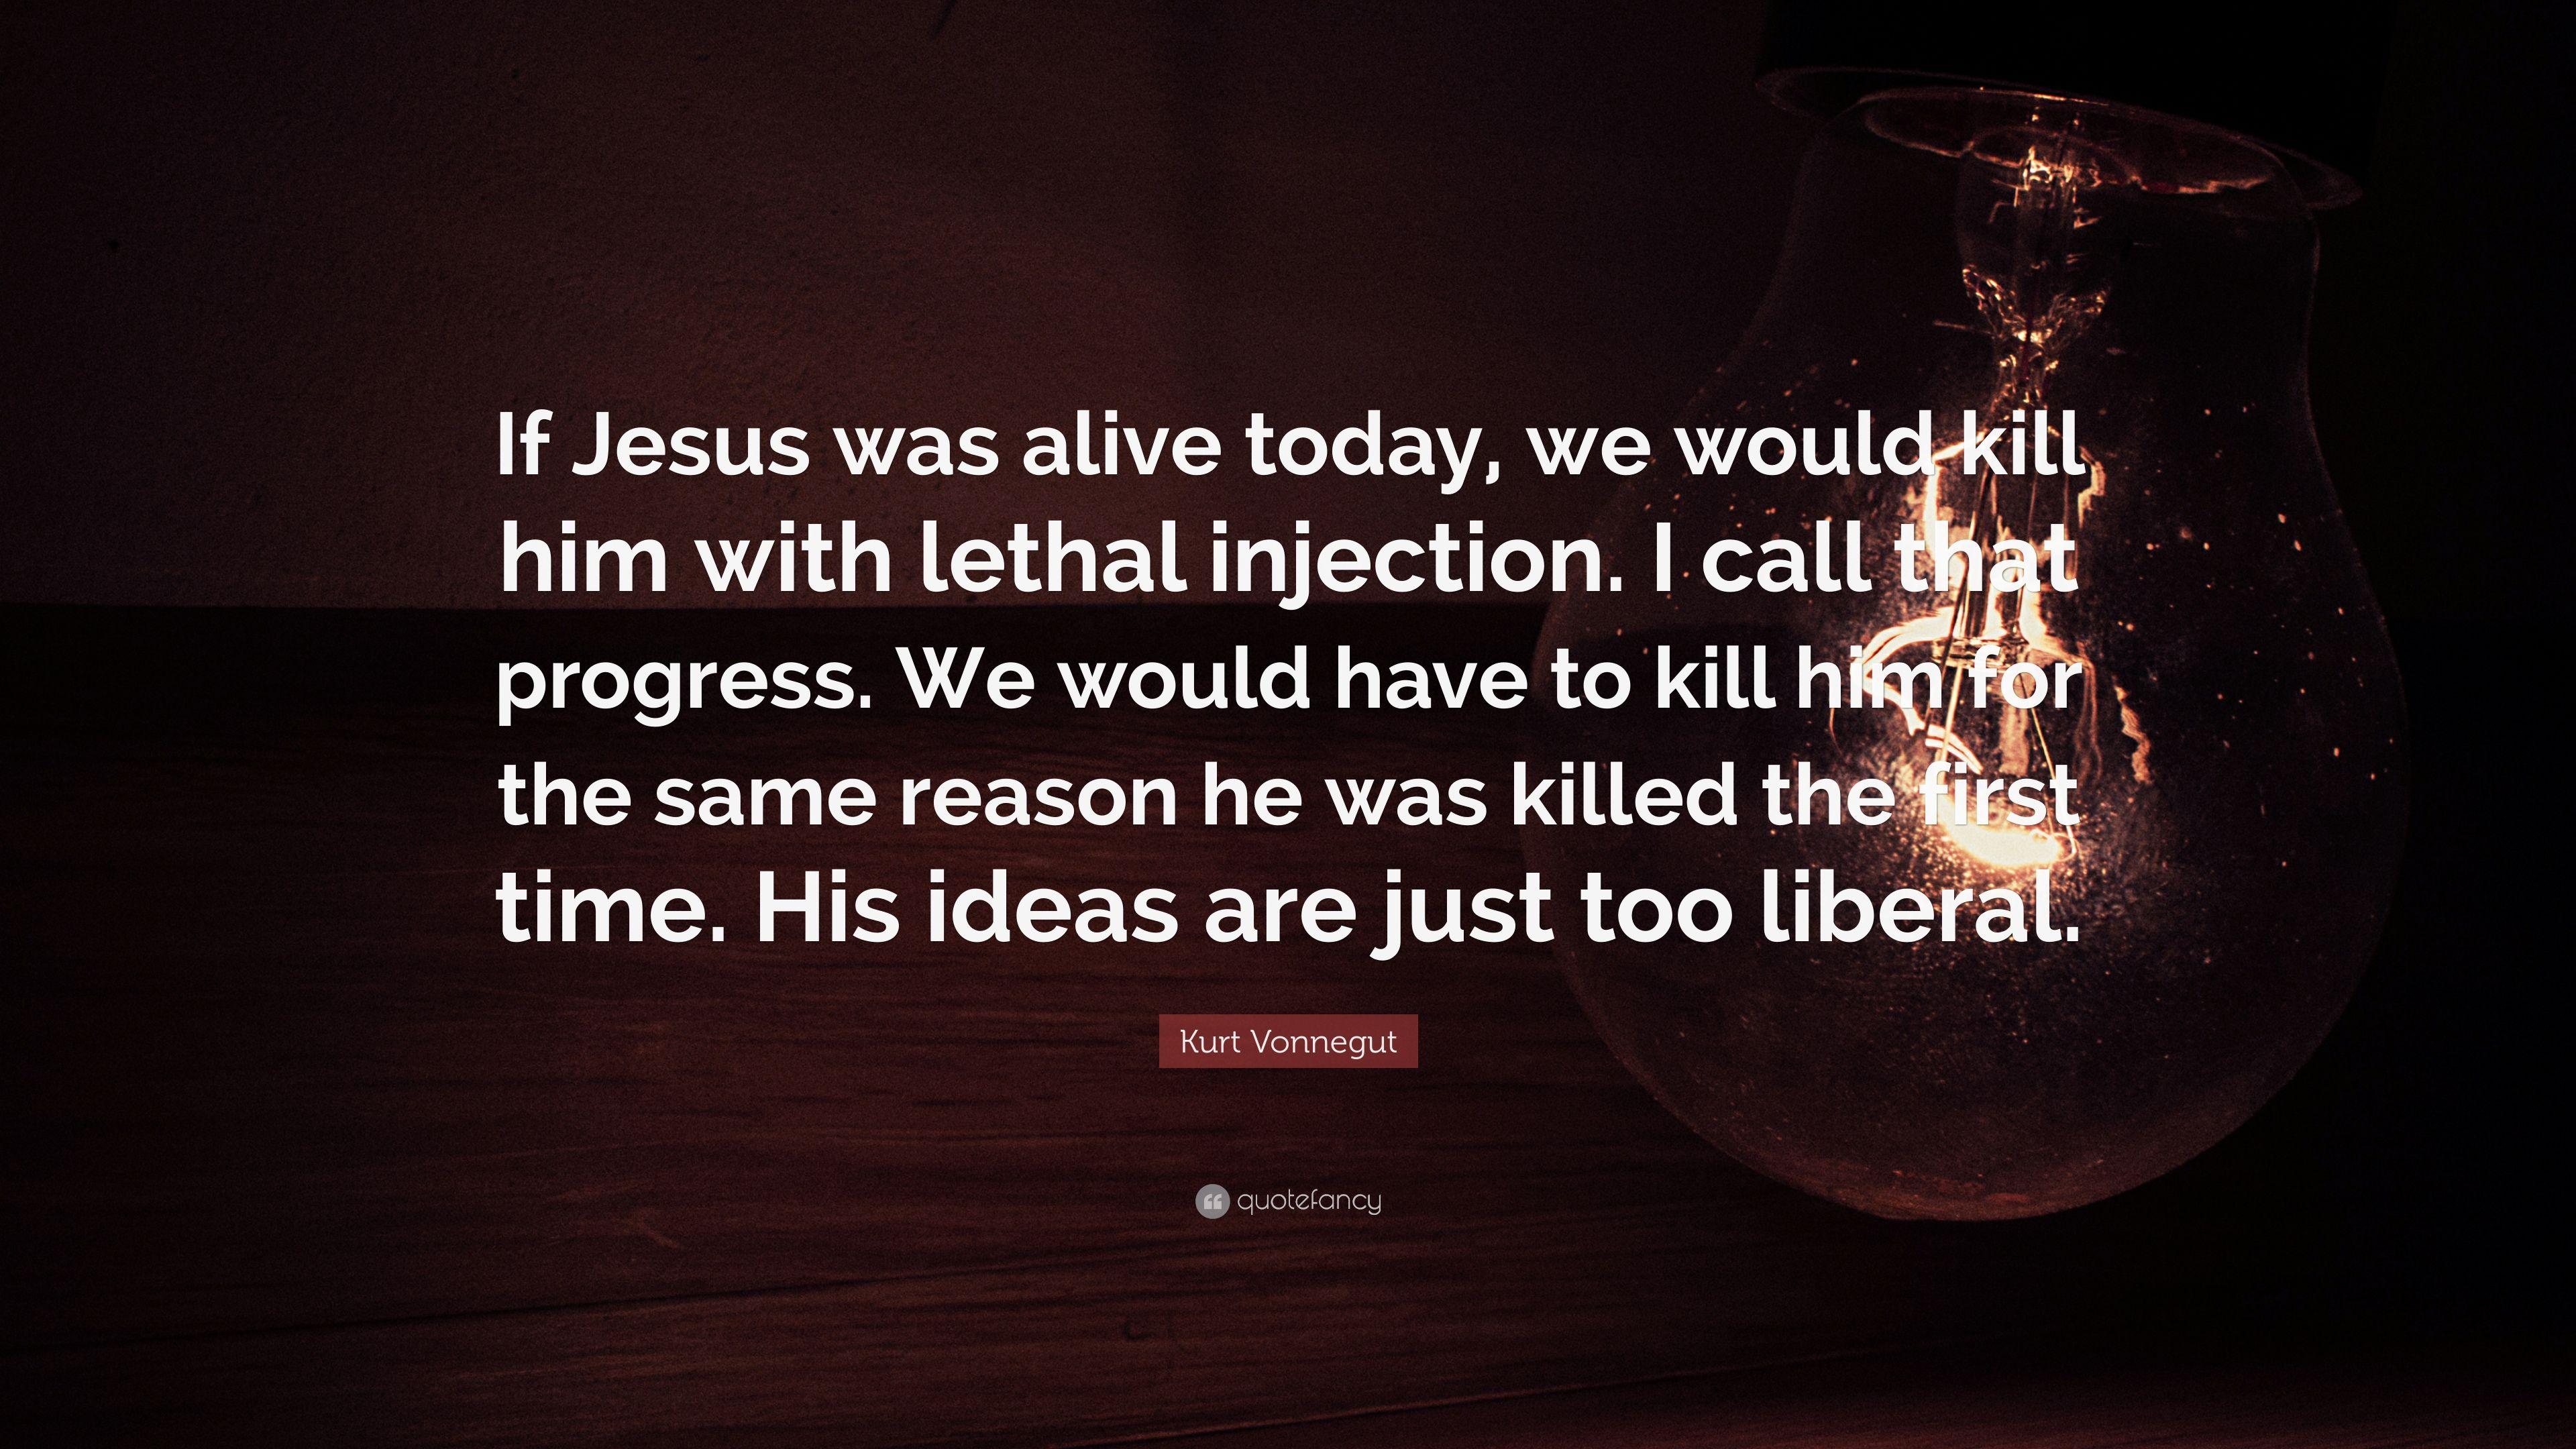 Kurt Vonnegut Quote: “If Jesus was alive today, we would kill him